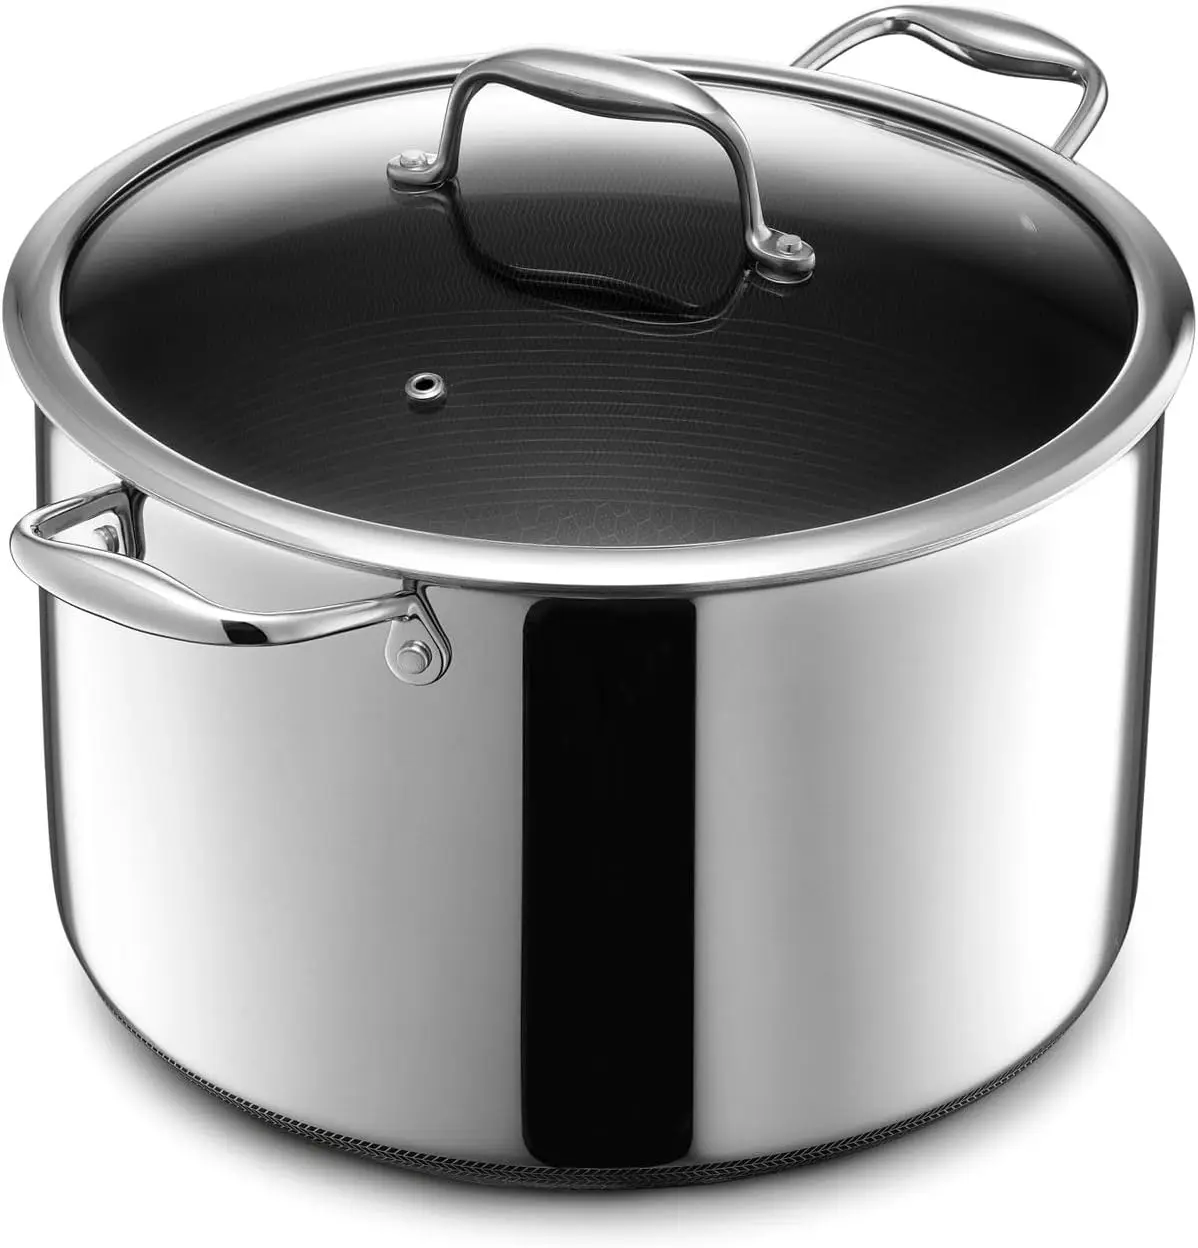 

HexClad Hybrid Nonstick 10-Quart Stockpot with Tempered Glass Lid,Dishwasher Safe, Induction Ready, Compatible with All Cooktops